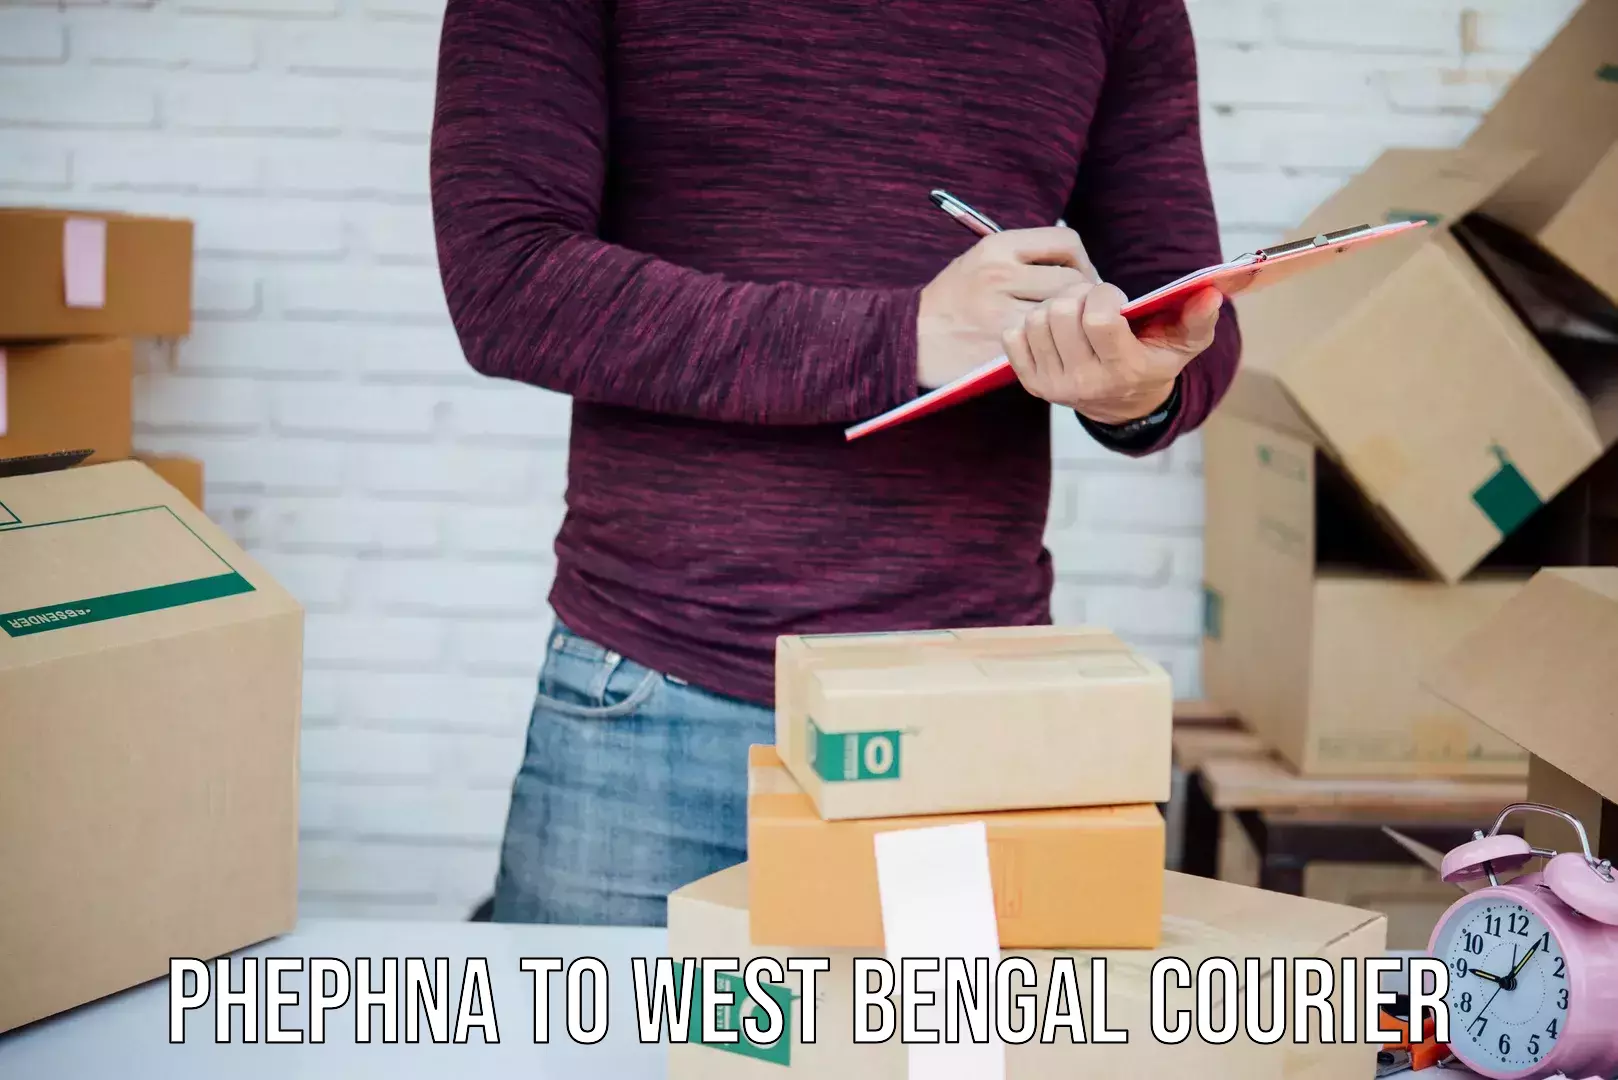 Express delivery solutions Phephna to West Bengal